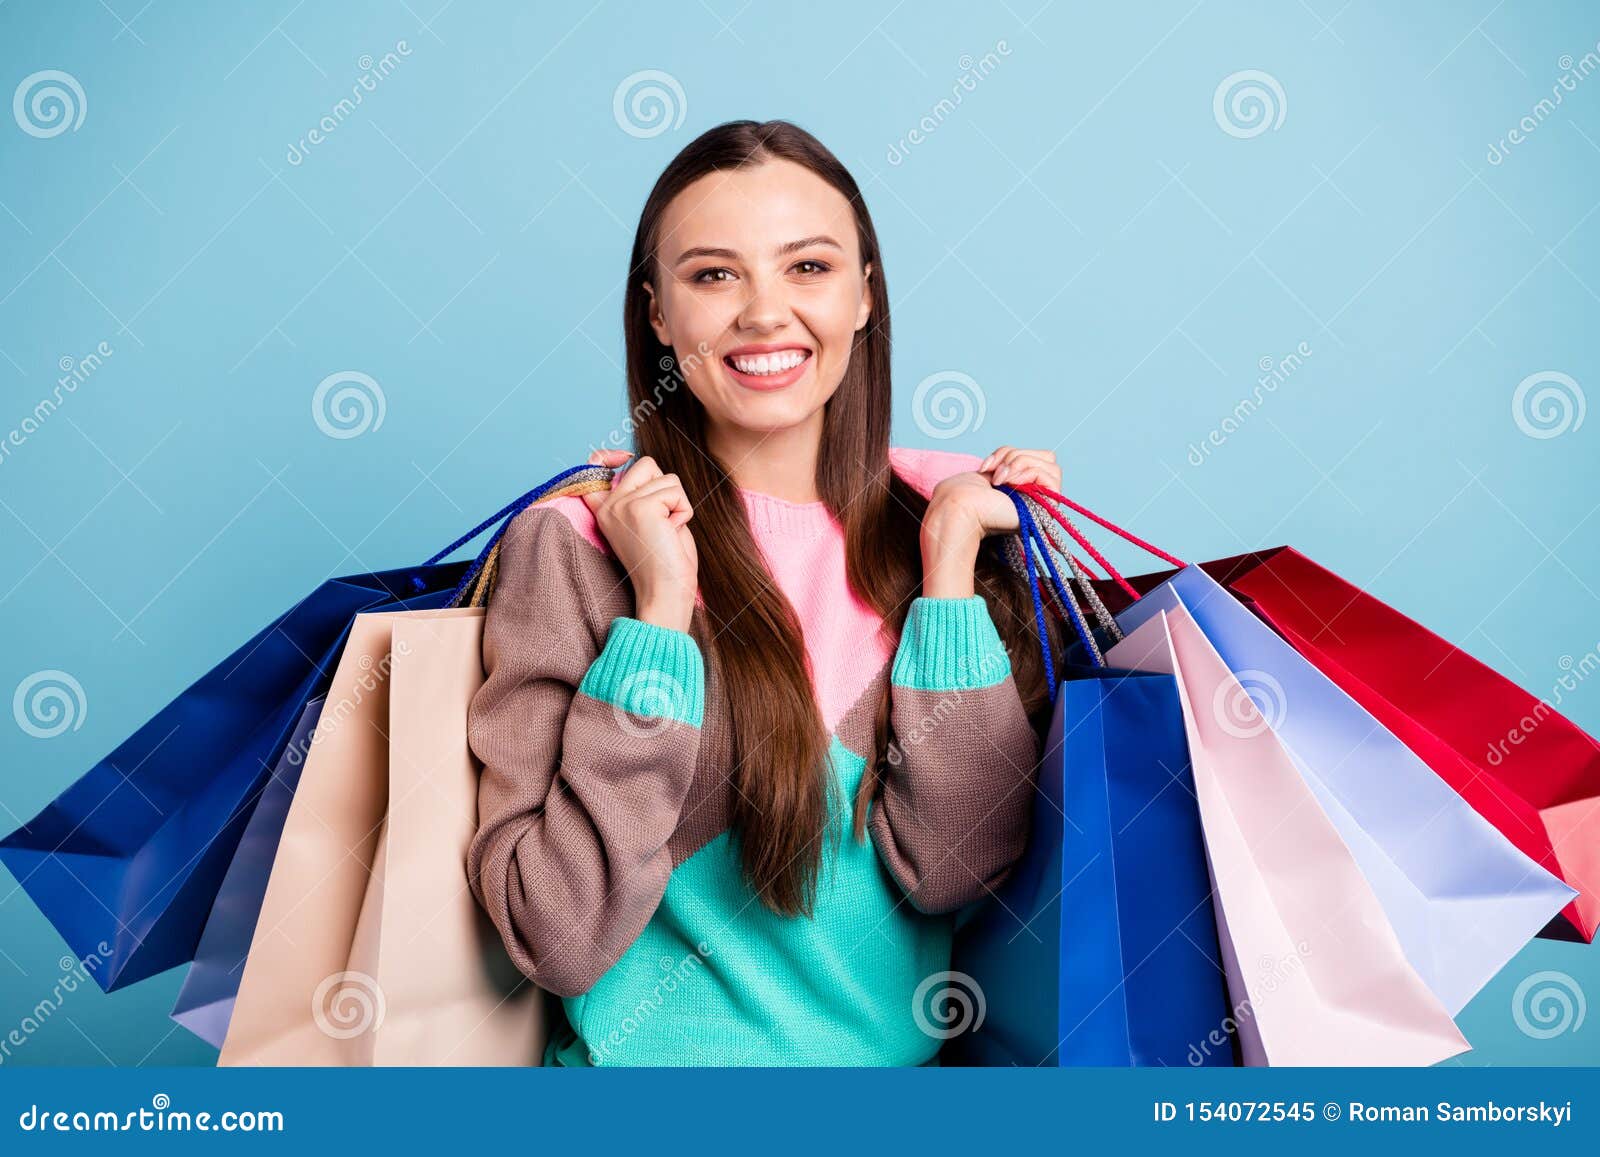 Shopping is My Passion Concept. Close-up Photo Portrait of Pretty with ...